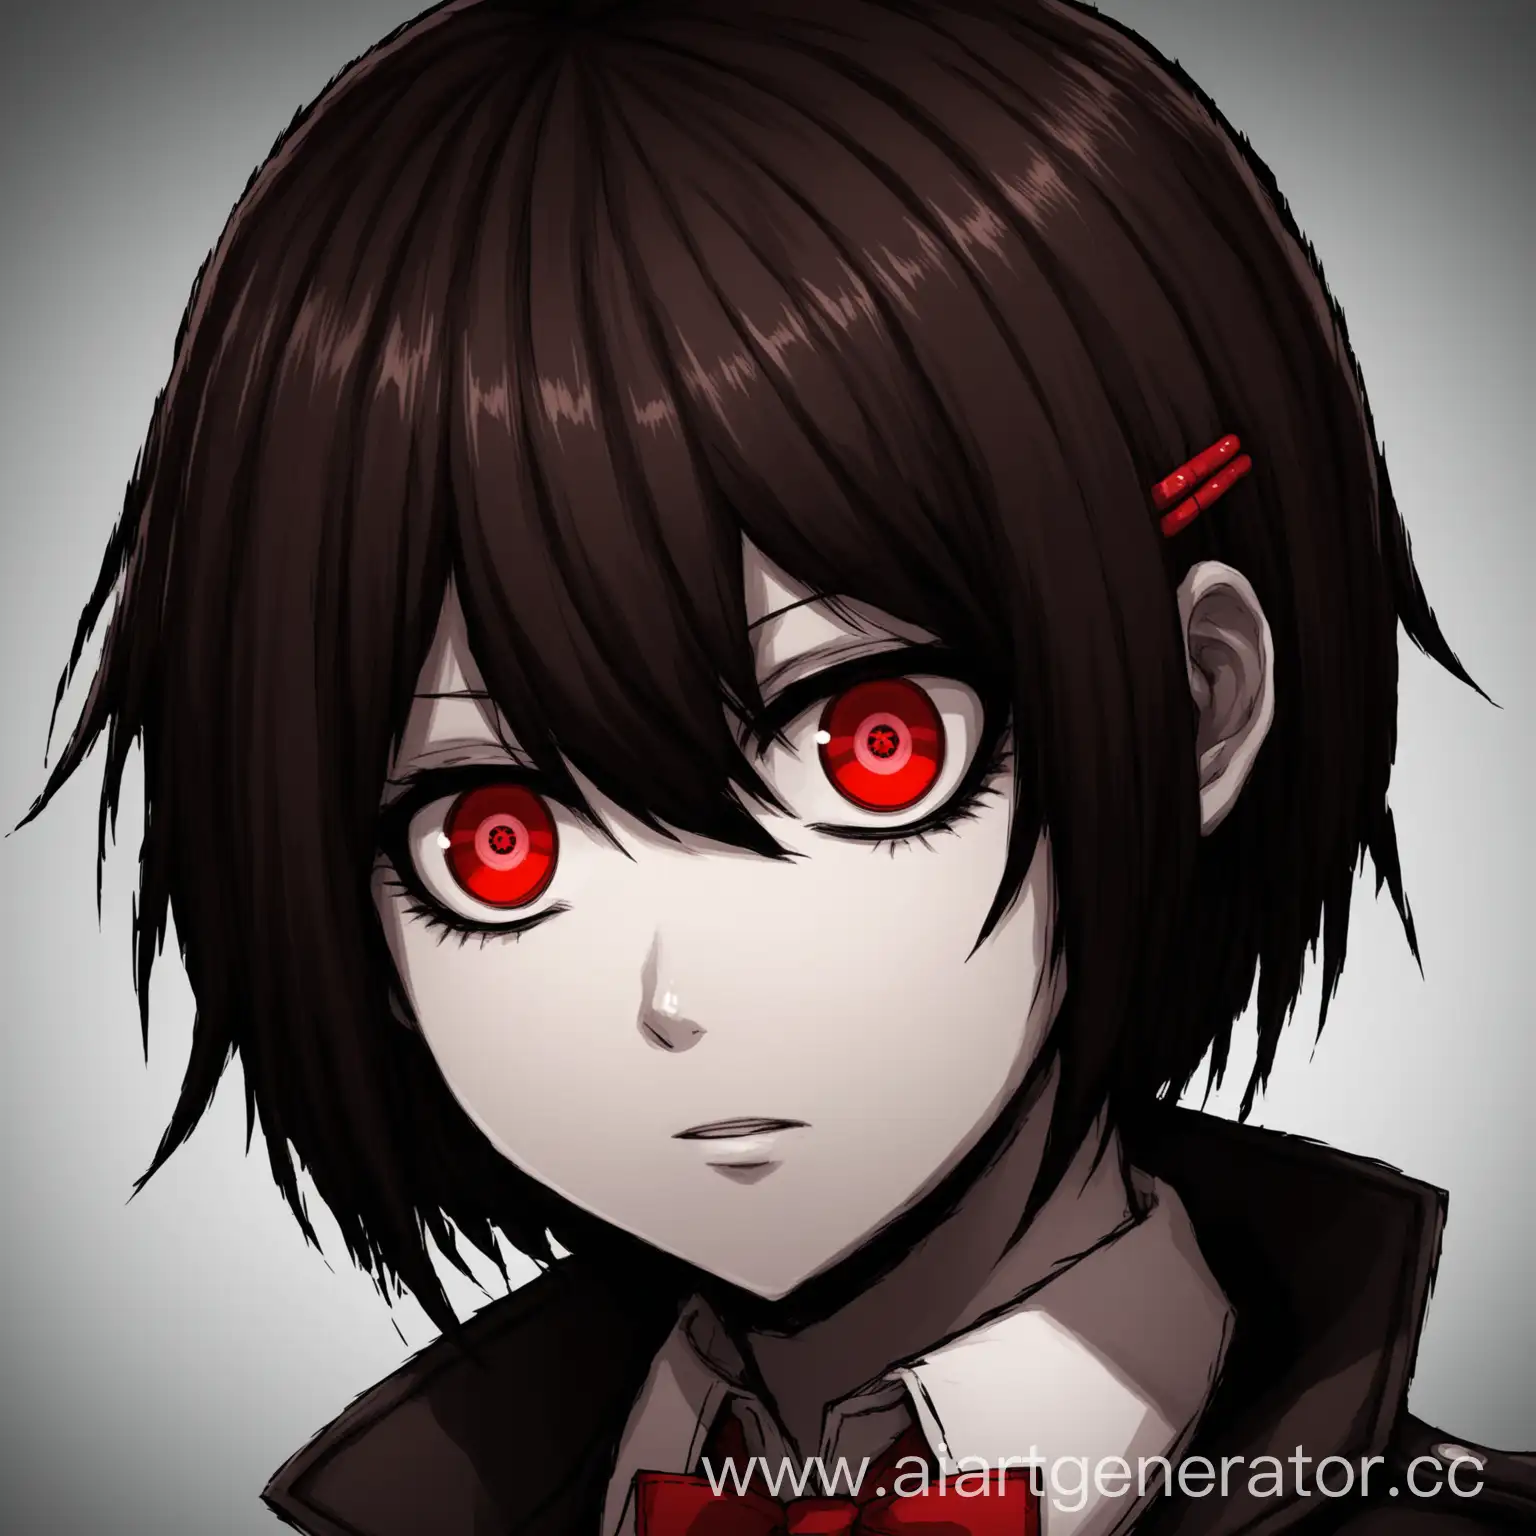 Mysterious-Character-with-Short-Dark-Brown-Hair-and-Red-Eyes